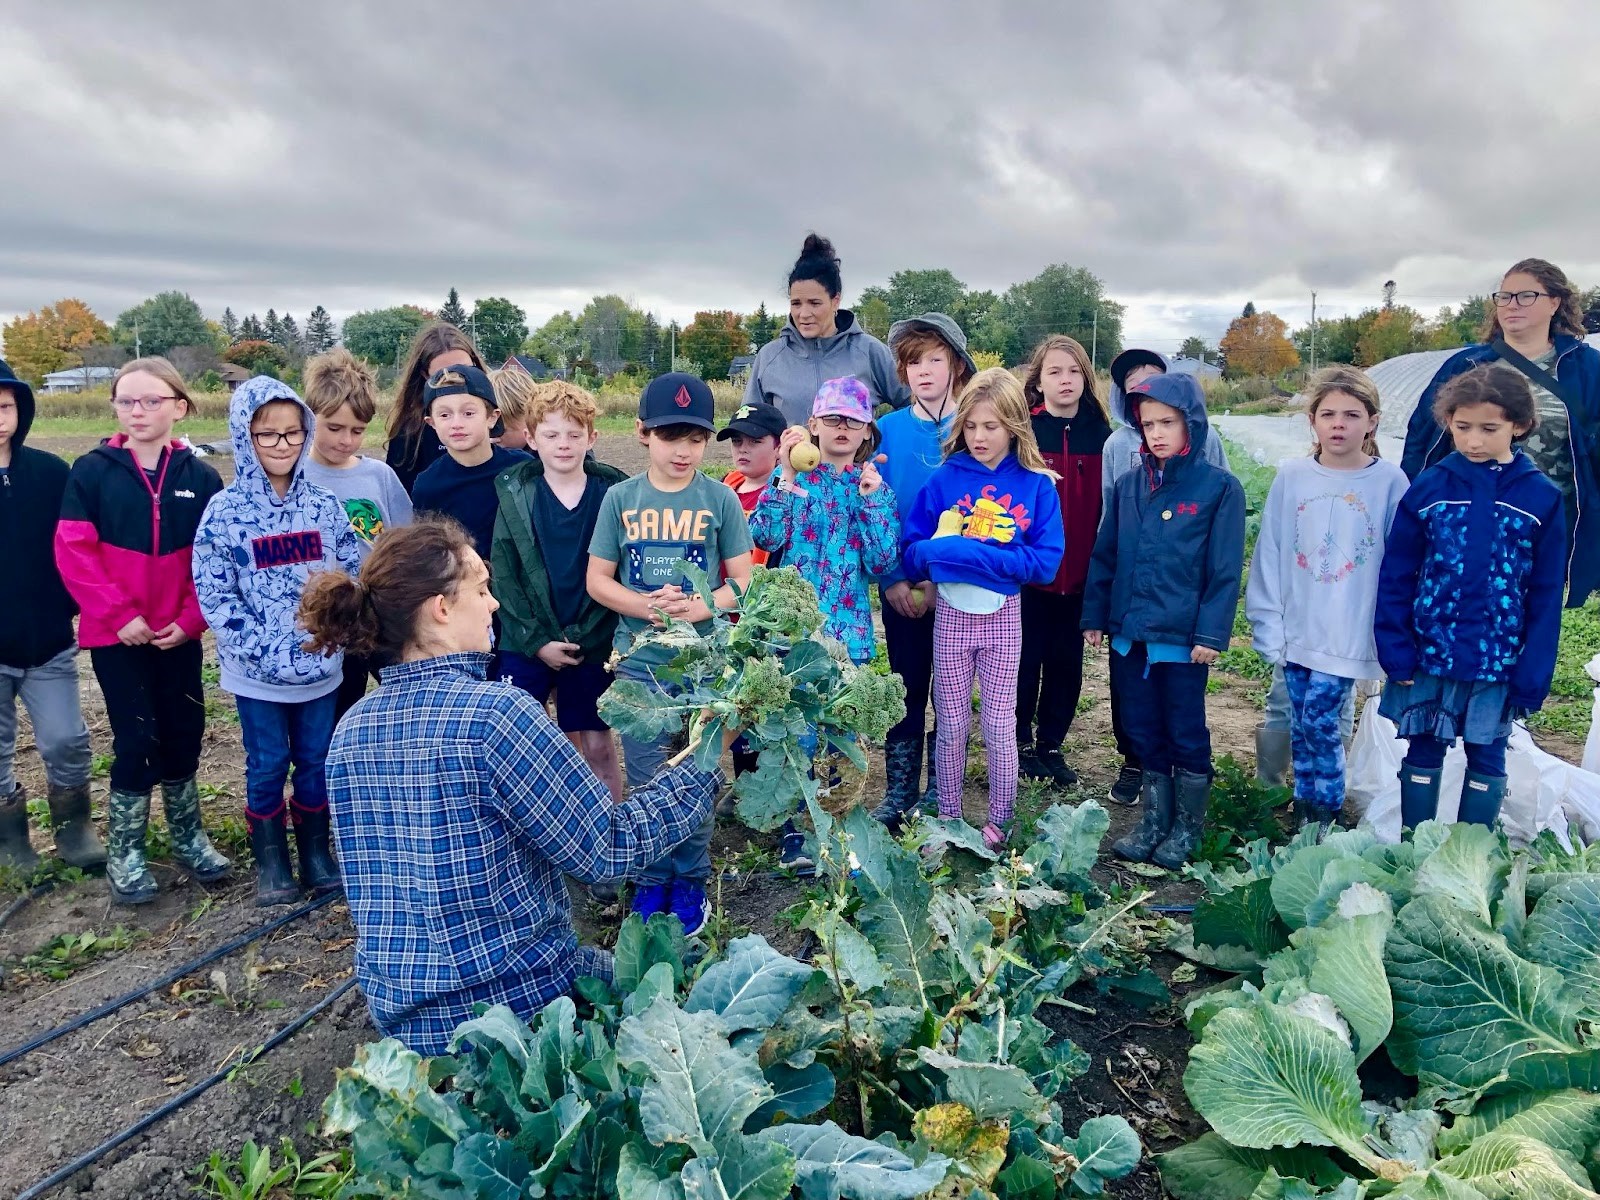 Emily Duncan displays a large harvested vegetable to a group of students.